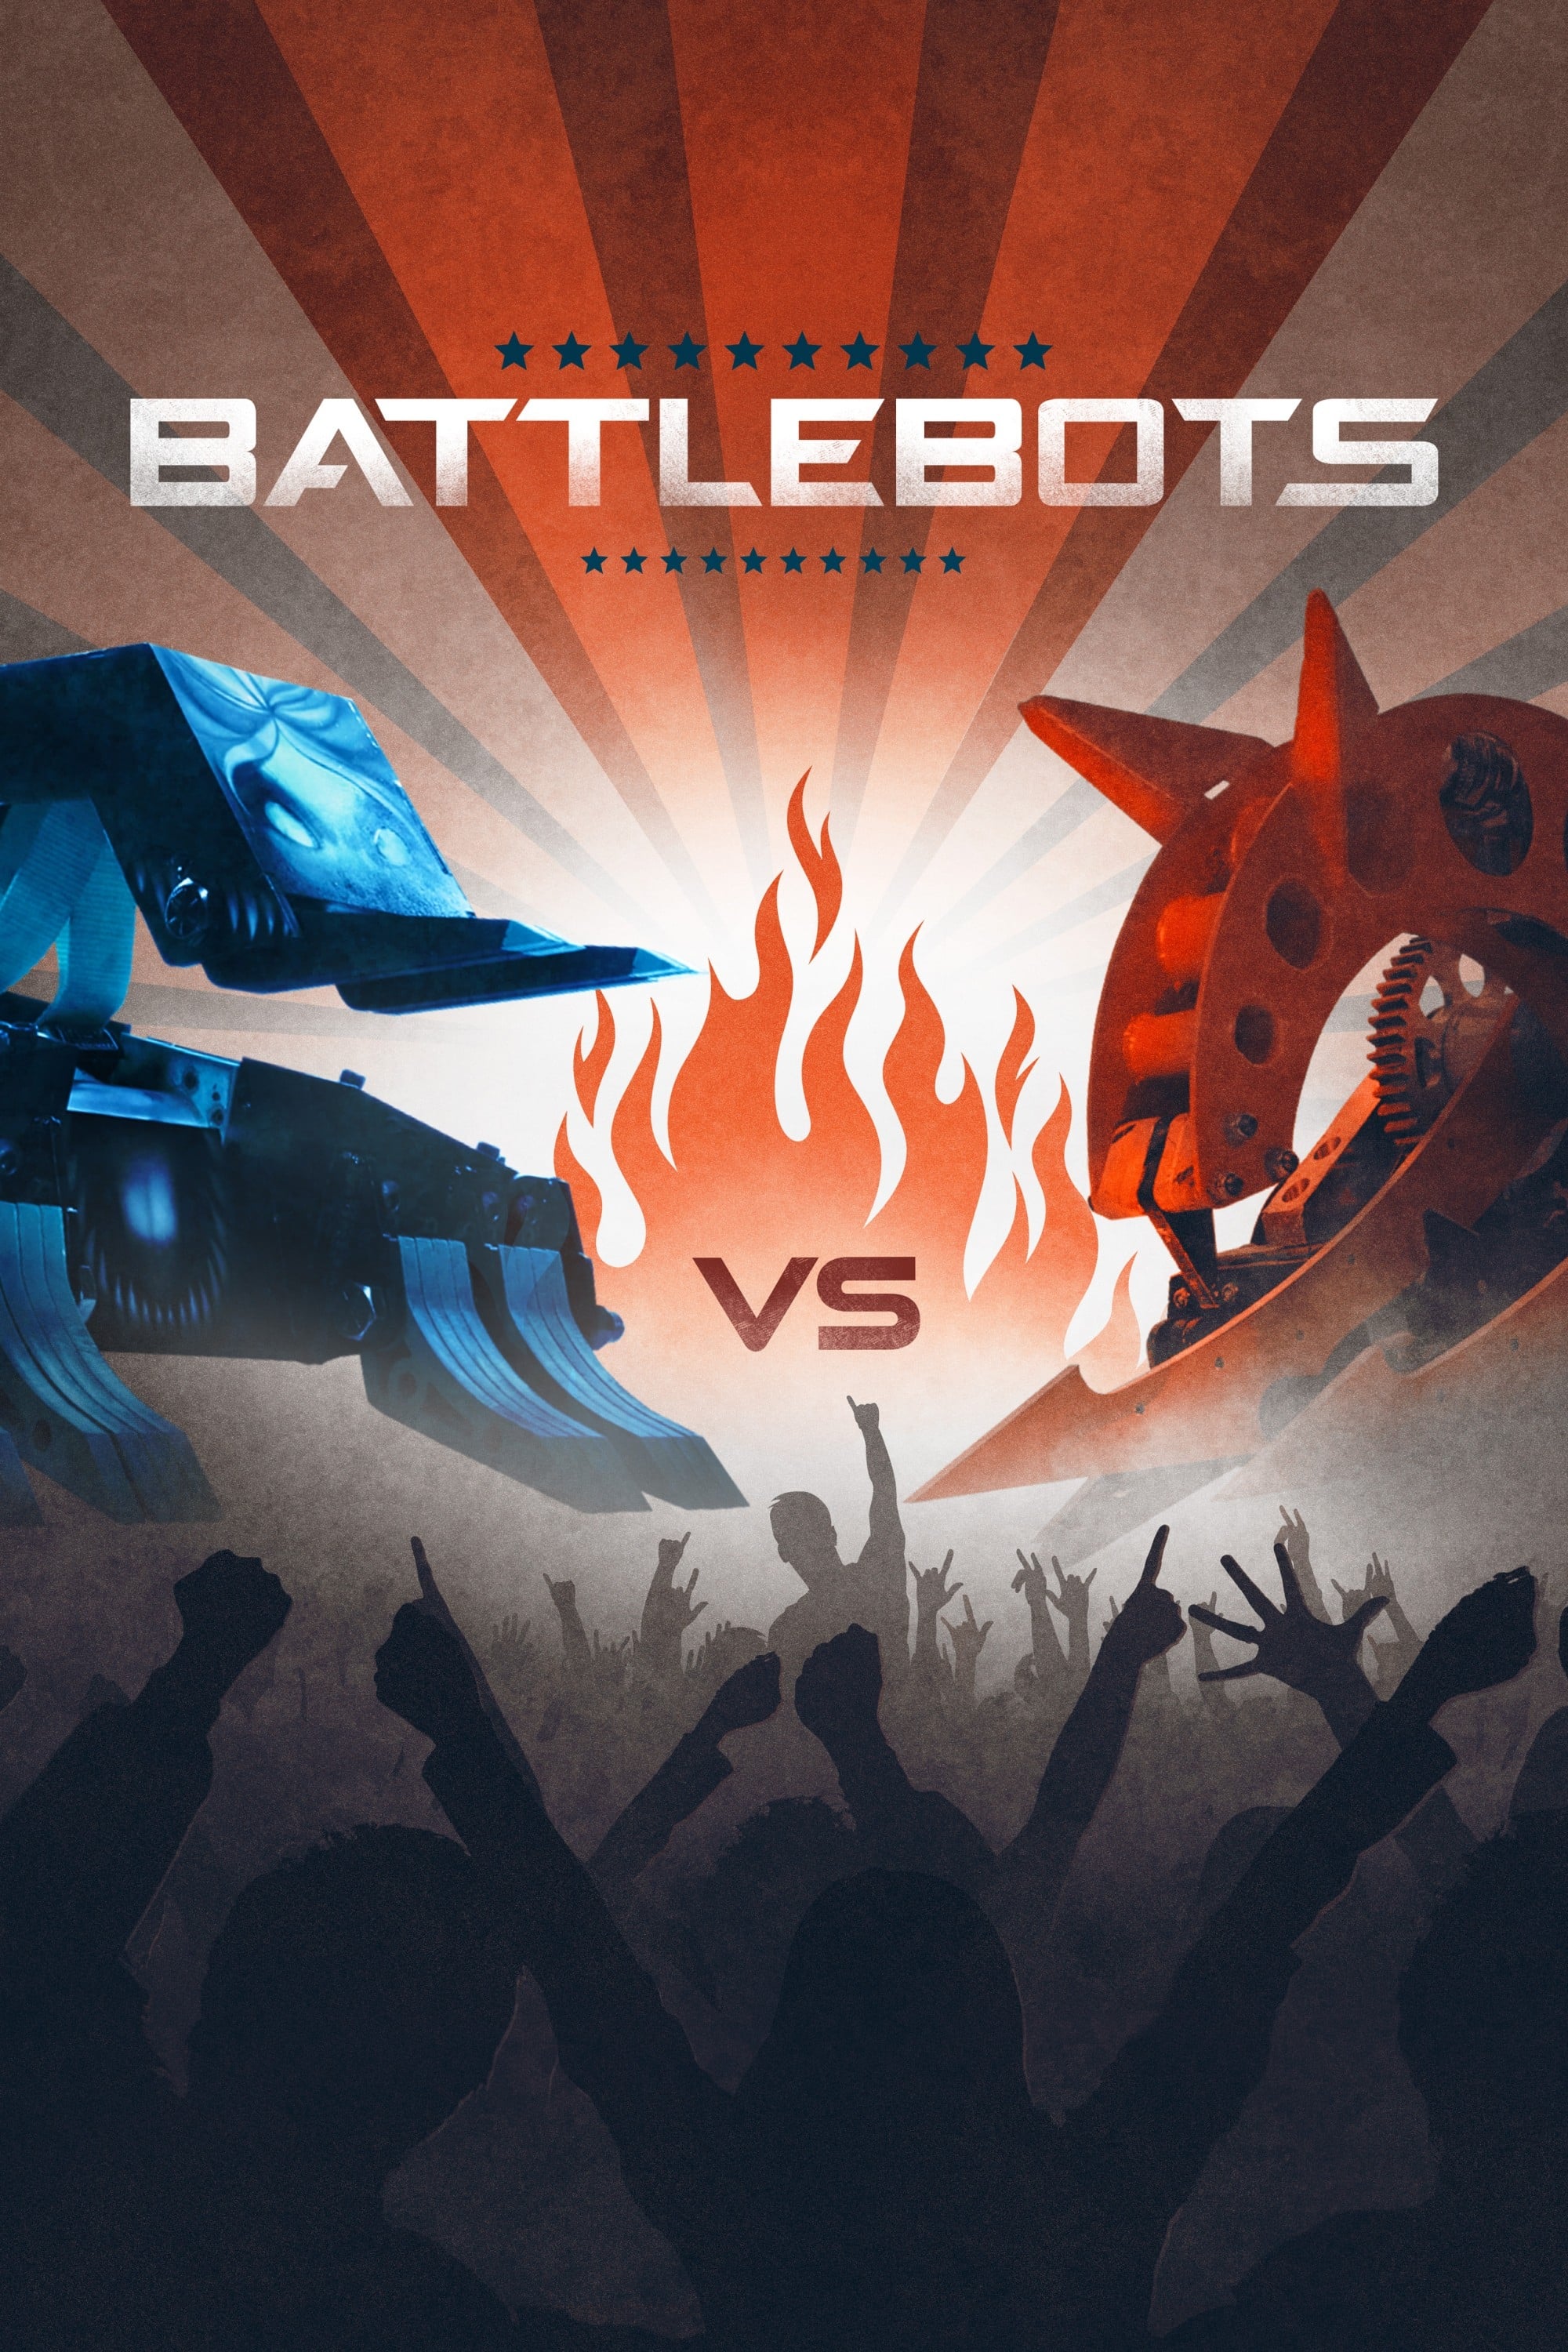 BattleBots TV Shows About Fighting